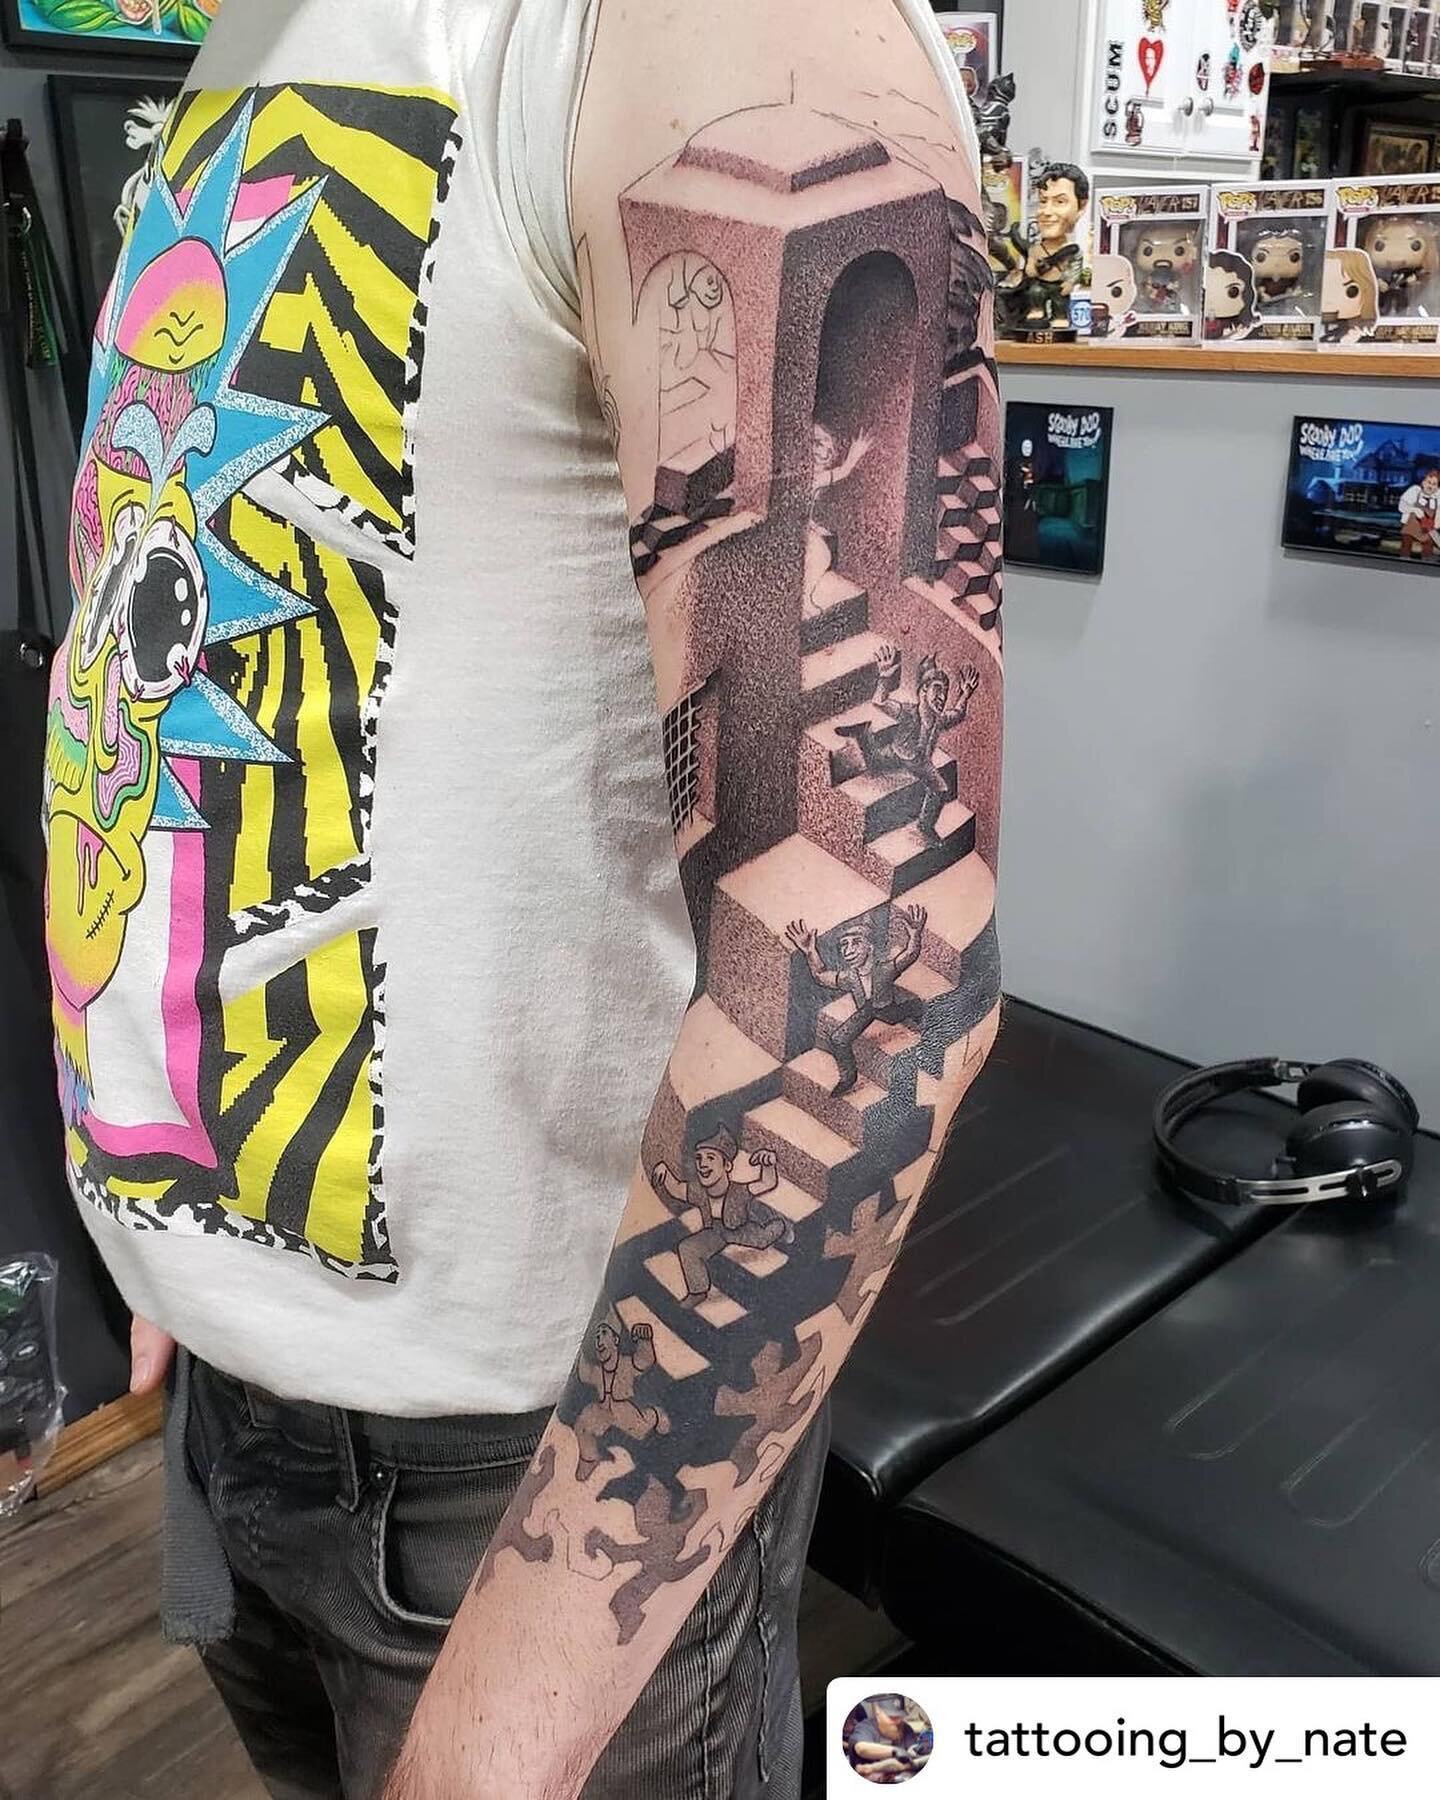 Made by: @tattooing_by_nate 
⚡️⚡️

Posted @withregram &bull; @tattooing_by_nate Check out this crazy MC Escher sleeve I've been lucky enough to tattoo! Thanks Jesh!!!
.
.
.
#LightningRevivalTattooCompany #LightningRevivalTattooCo #LightningRevivalTat